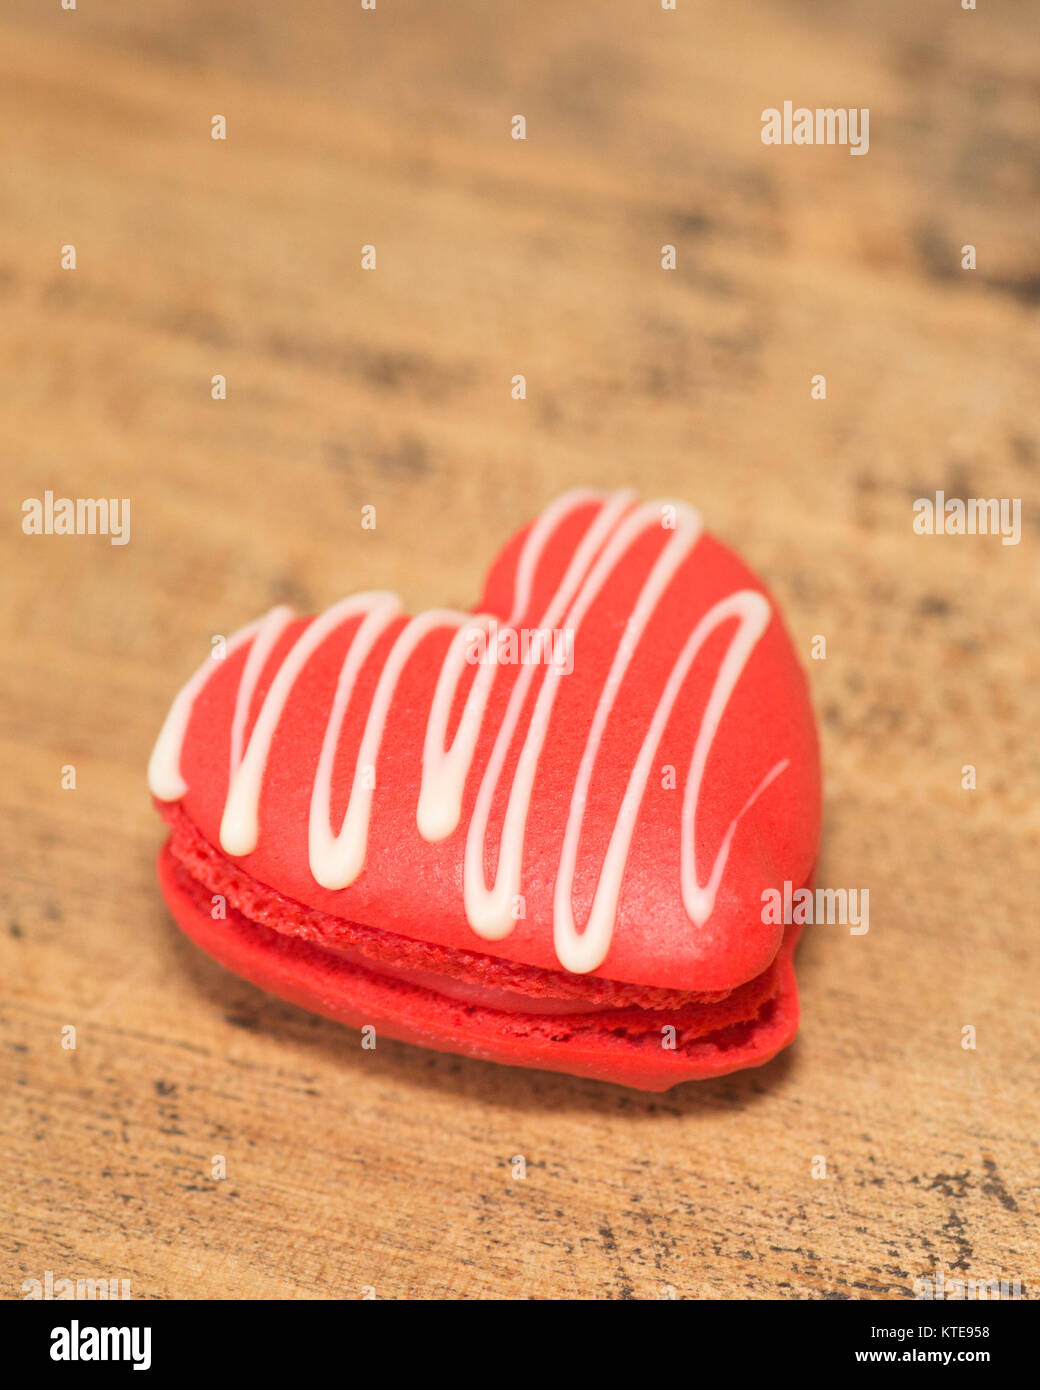 Heart-shaped macaron drizzled with white chocolate Stock Photo